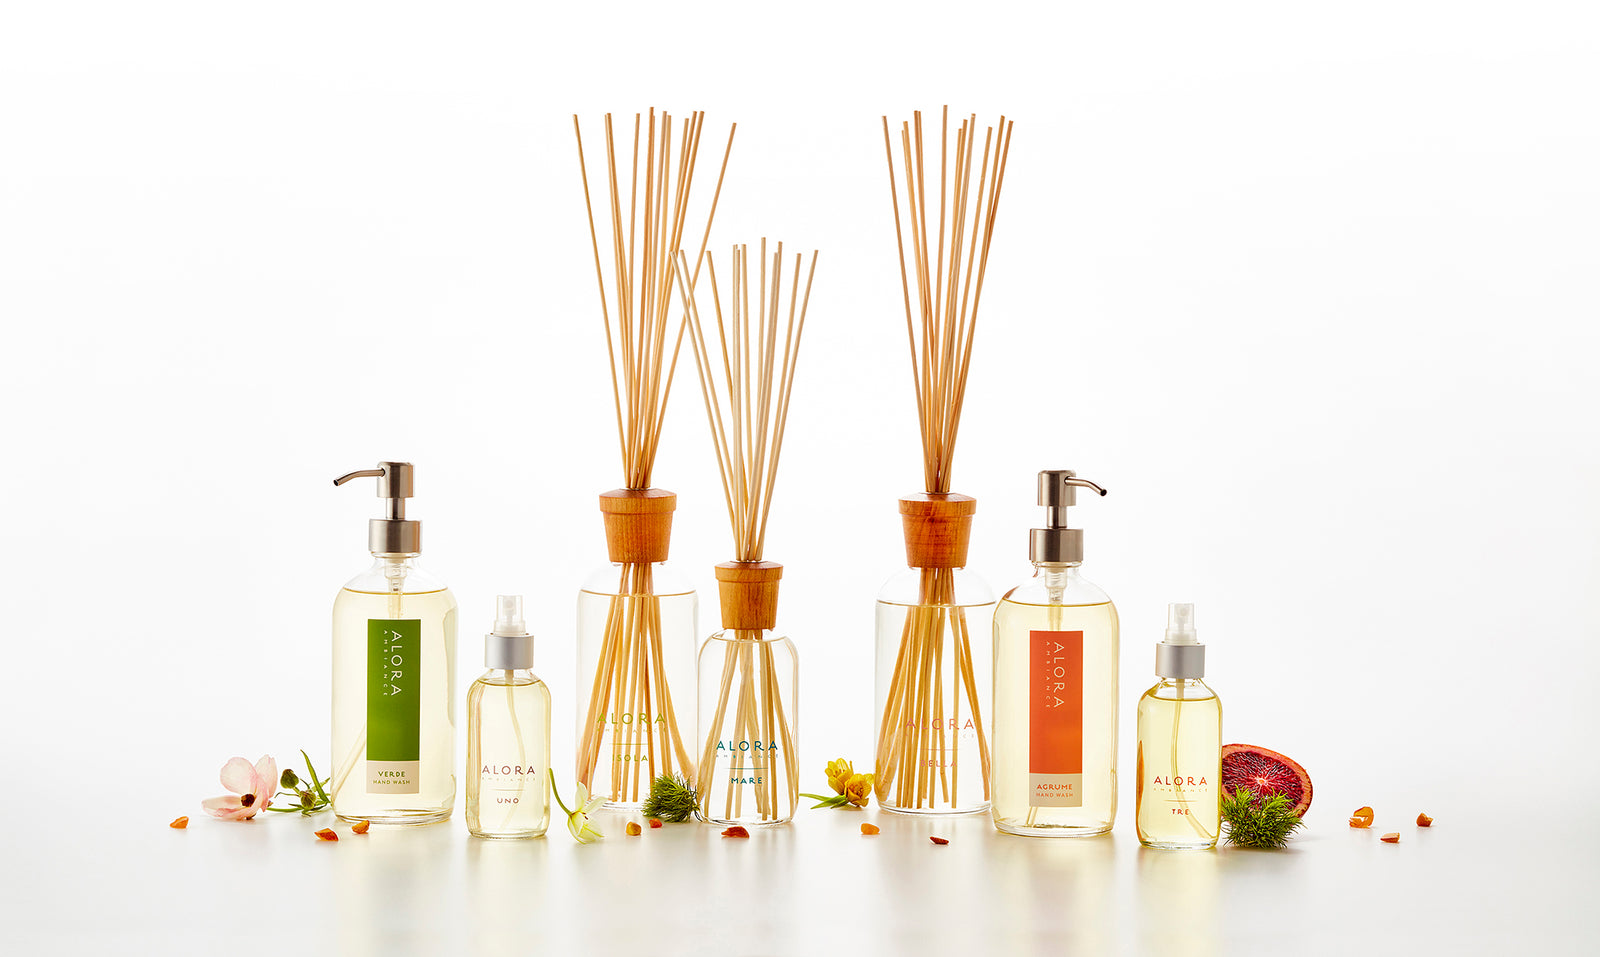 Reed diffusers, hand wash, and room spray bottles in front of white background